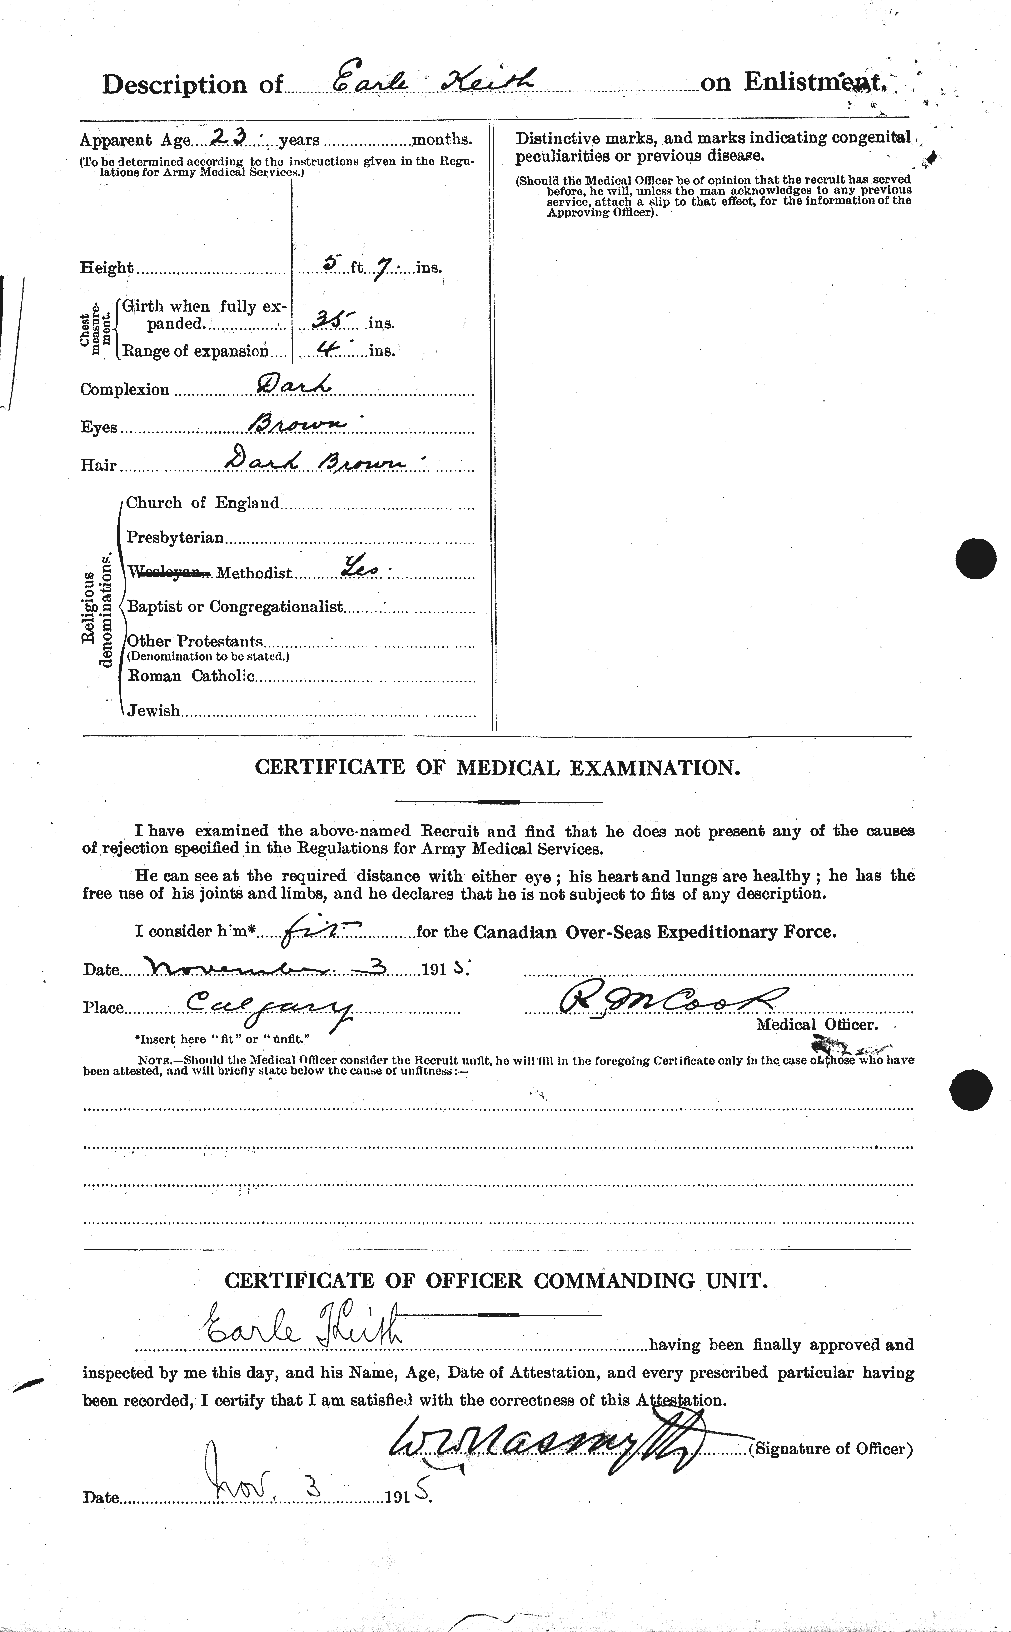 Personnel Records of the First World War - CEF 432412b